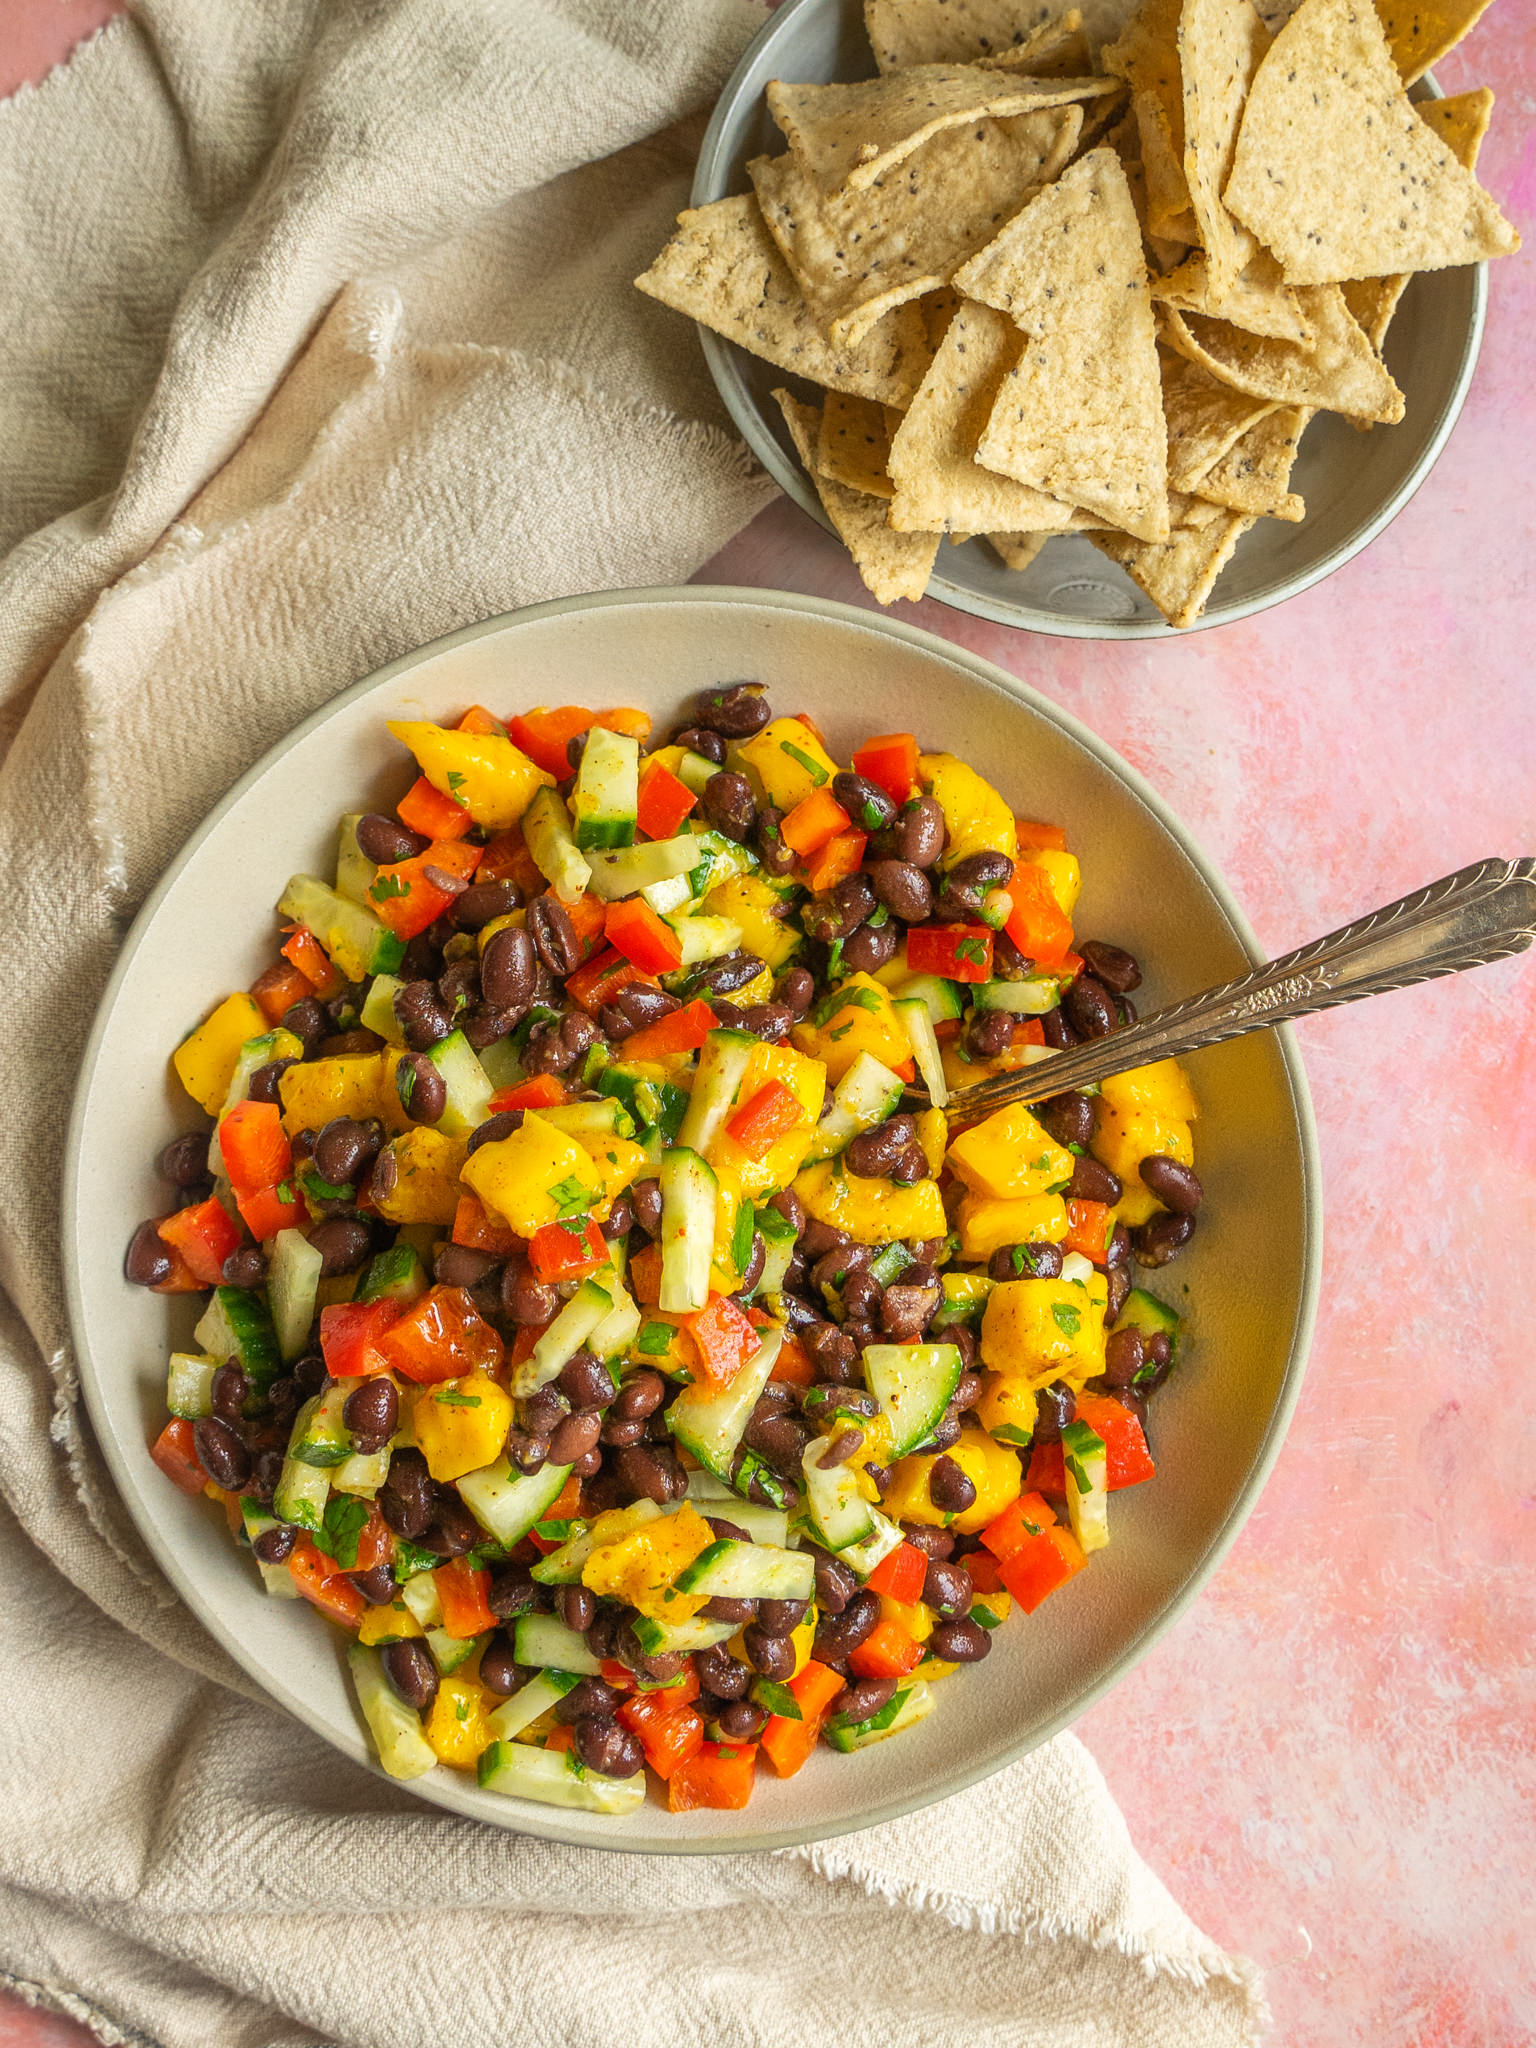 Mango salad recipe in a serving bowl with a serving spoon